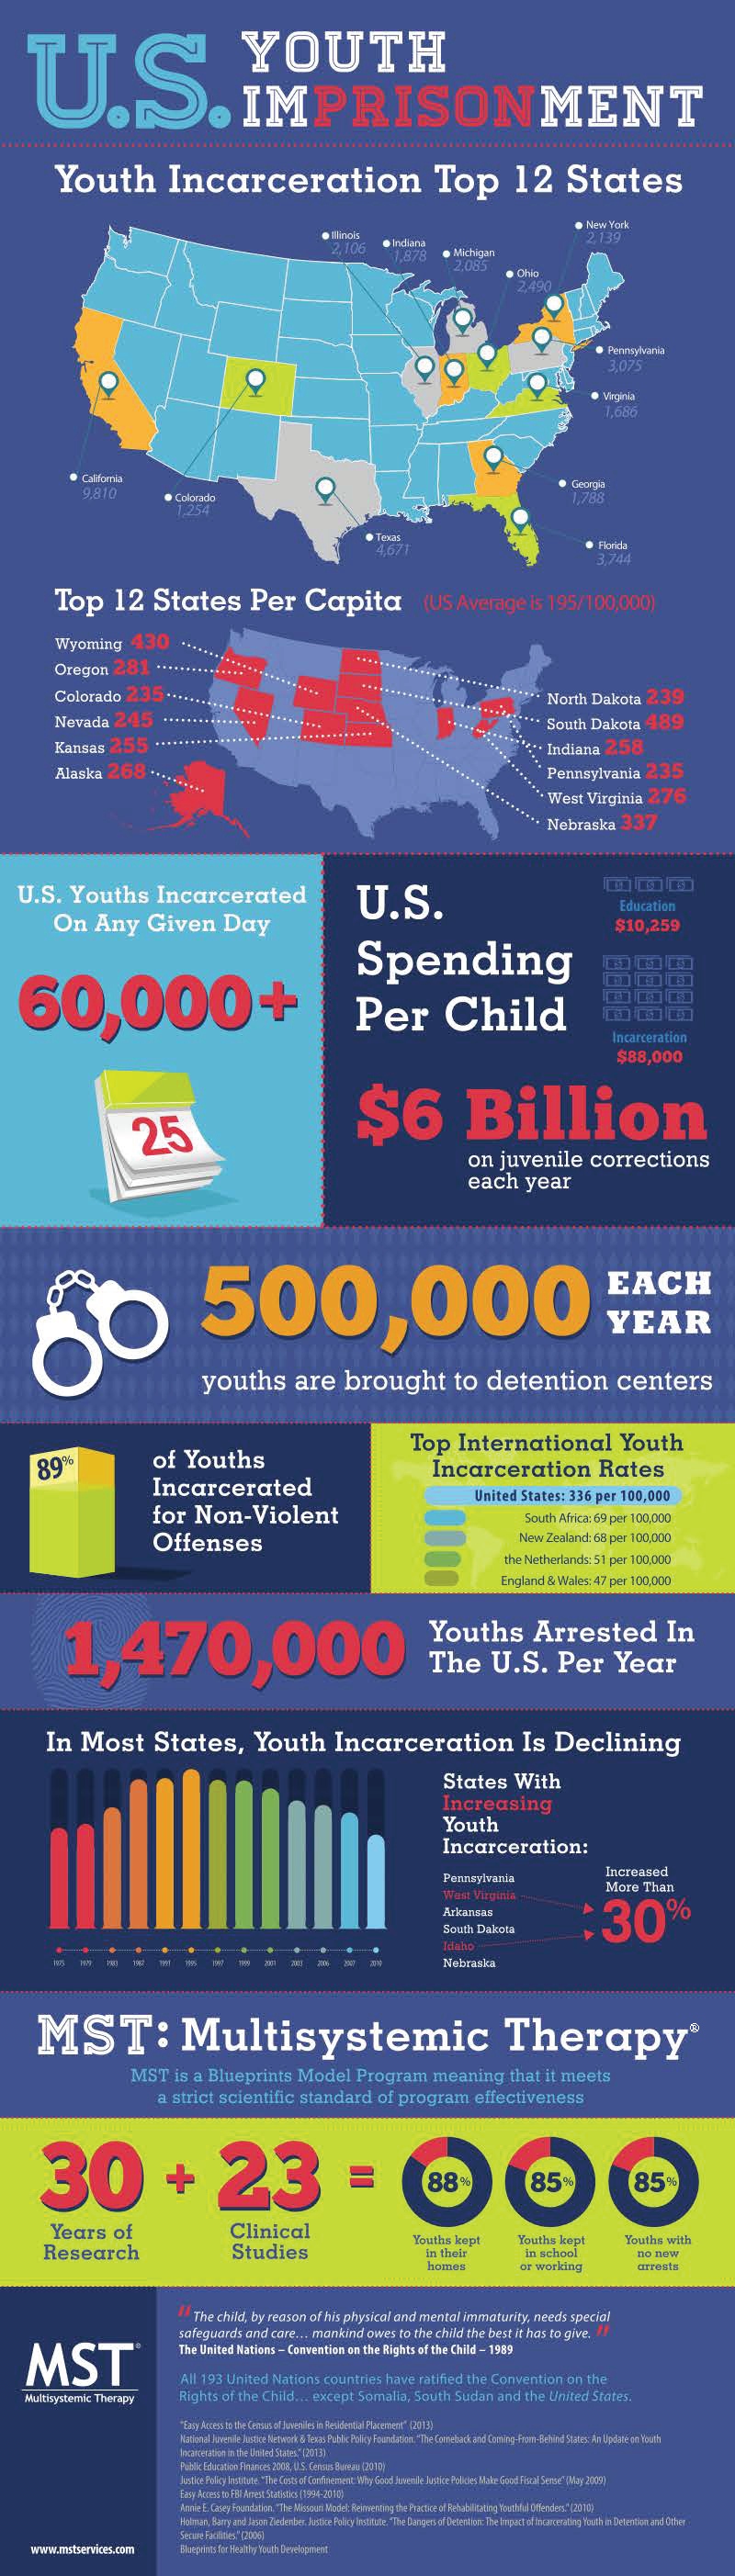 juvenile-justice_infographic_print_final_outlines_070214